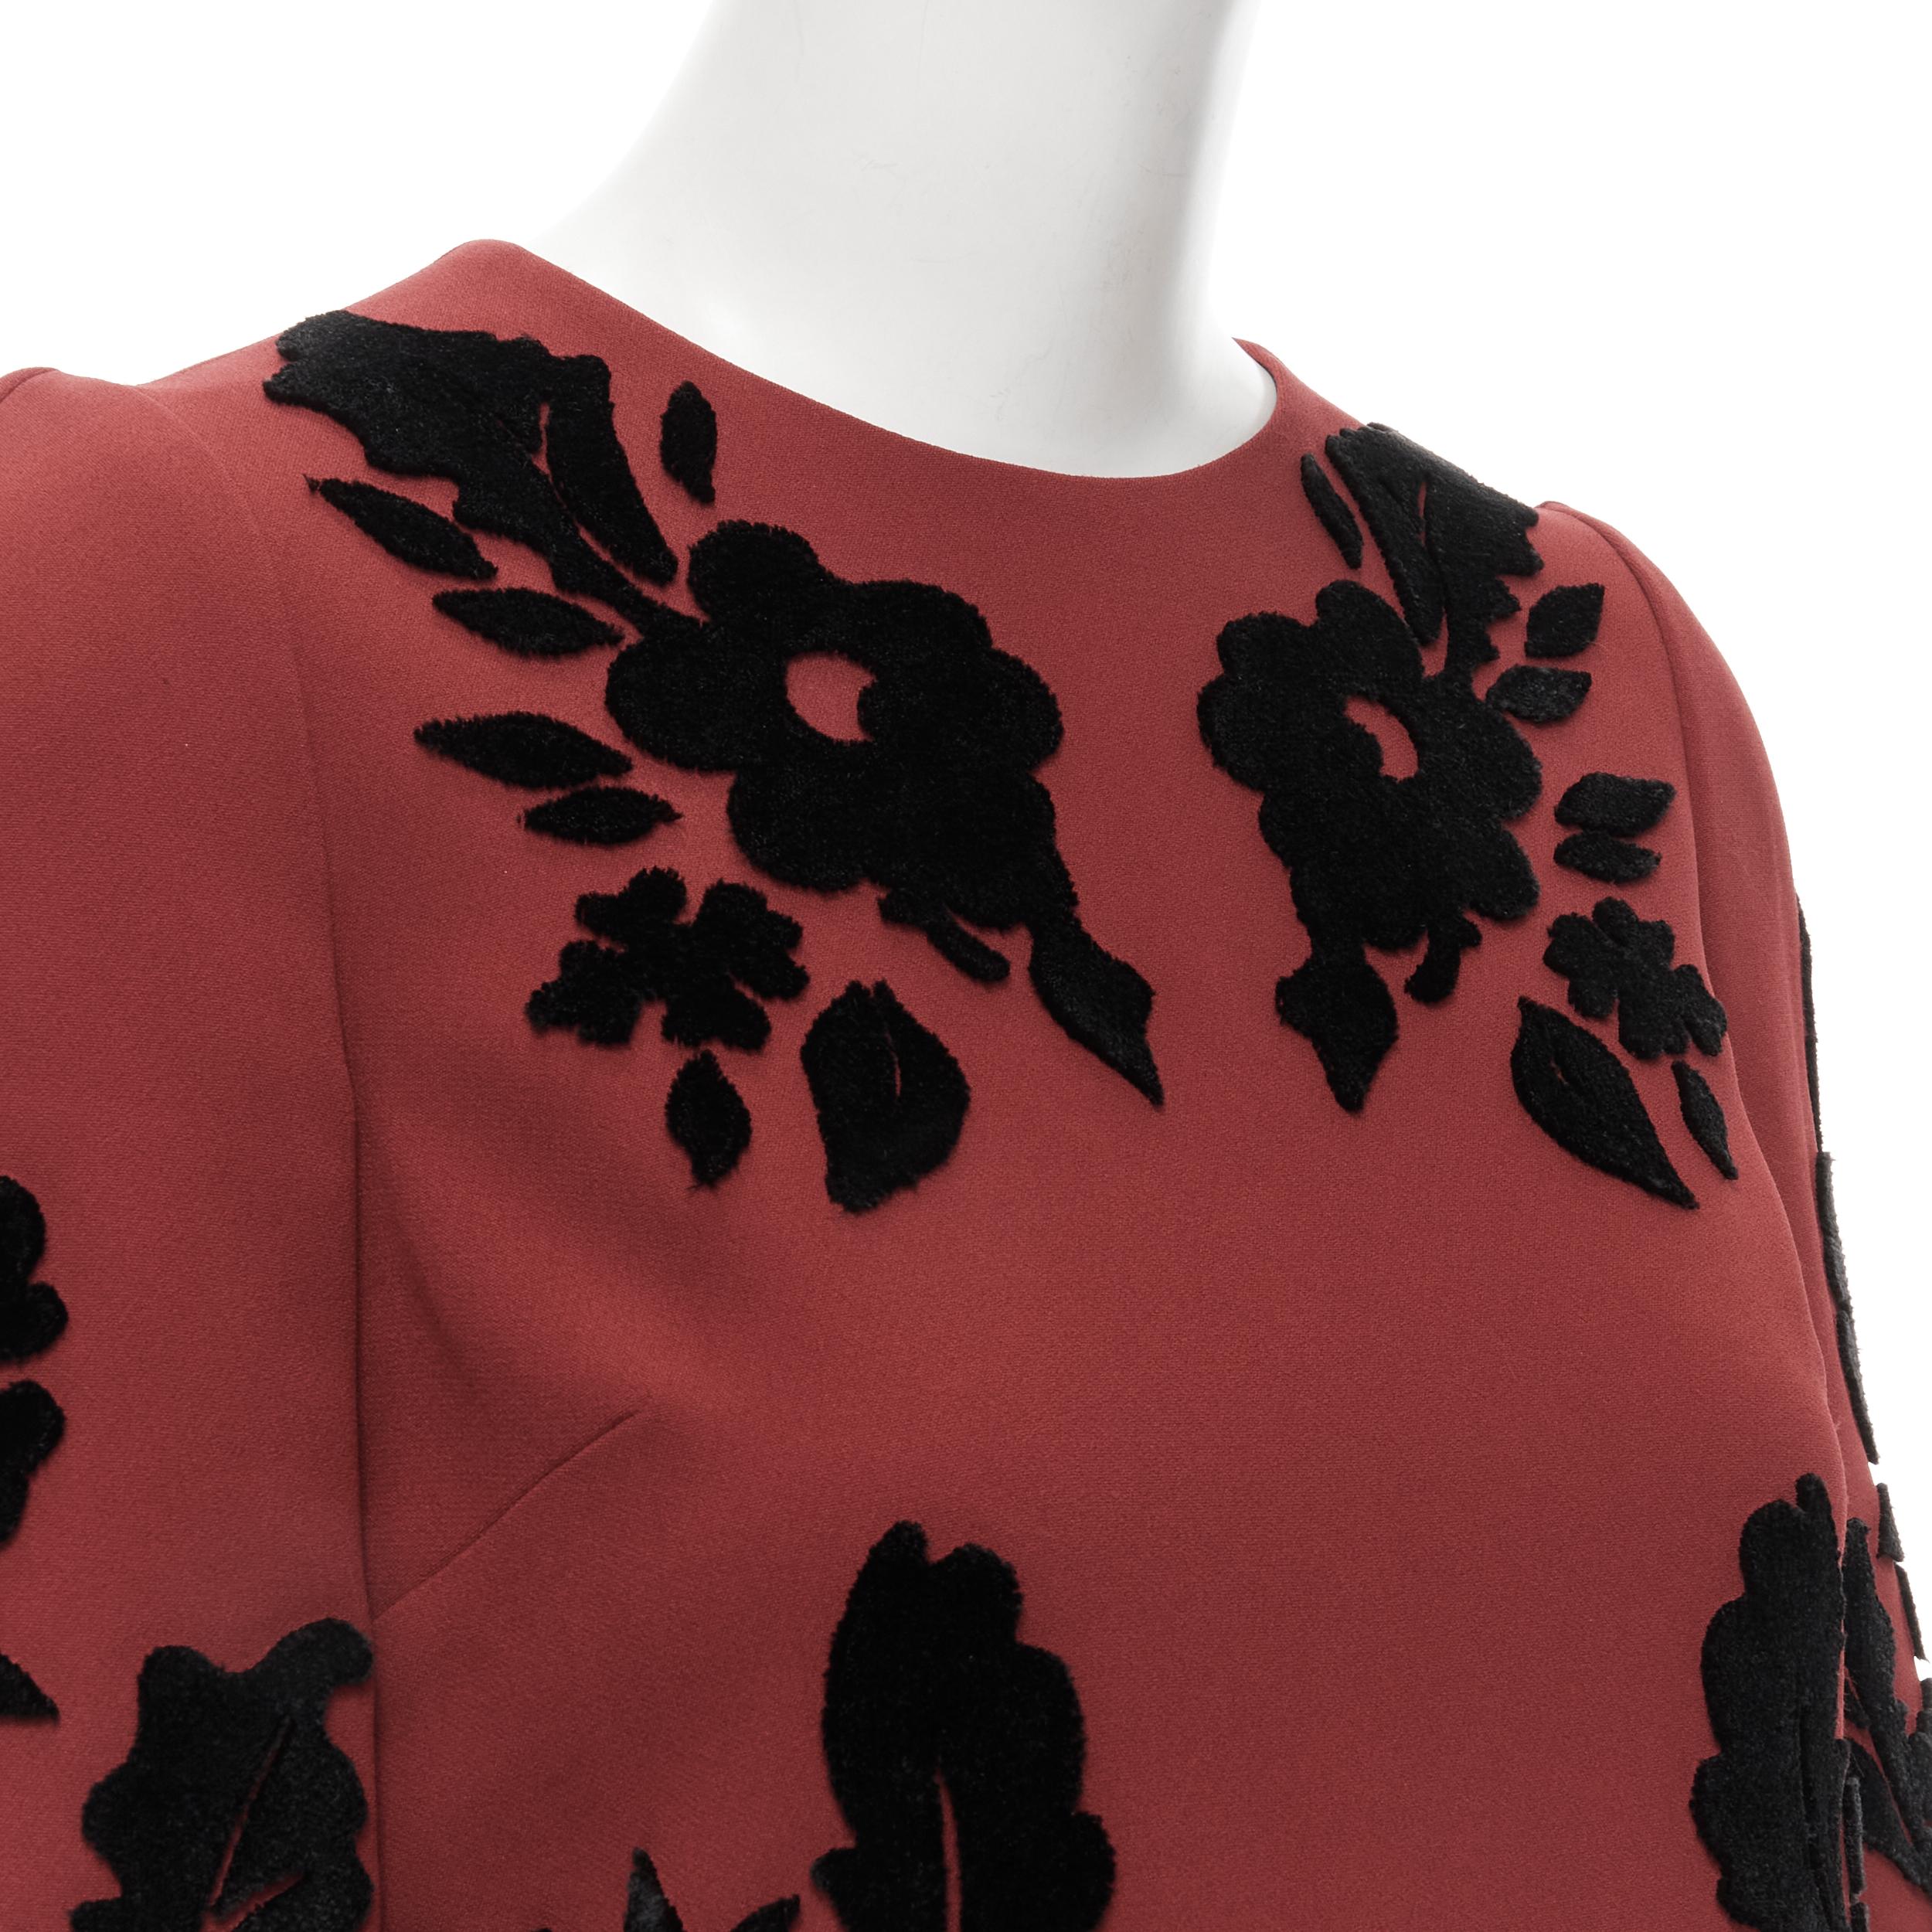 DOLCE GABBANA red crepe floral velvet devore sheath dress IT36 XS 
Reference: TGAS/B01852 
Brand: Dolce & Gabbana 
Material: Crepe 
Color: Red 
Pattern: Floral 
Closure: Zip 
Extra Detail: Fully lined in silk. 
Made in: Italy 

CONDITION: